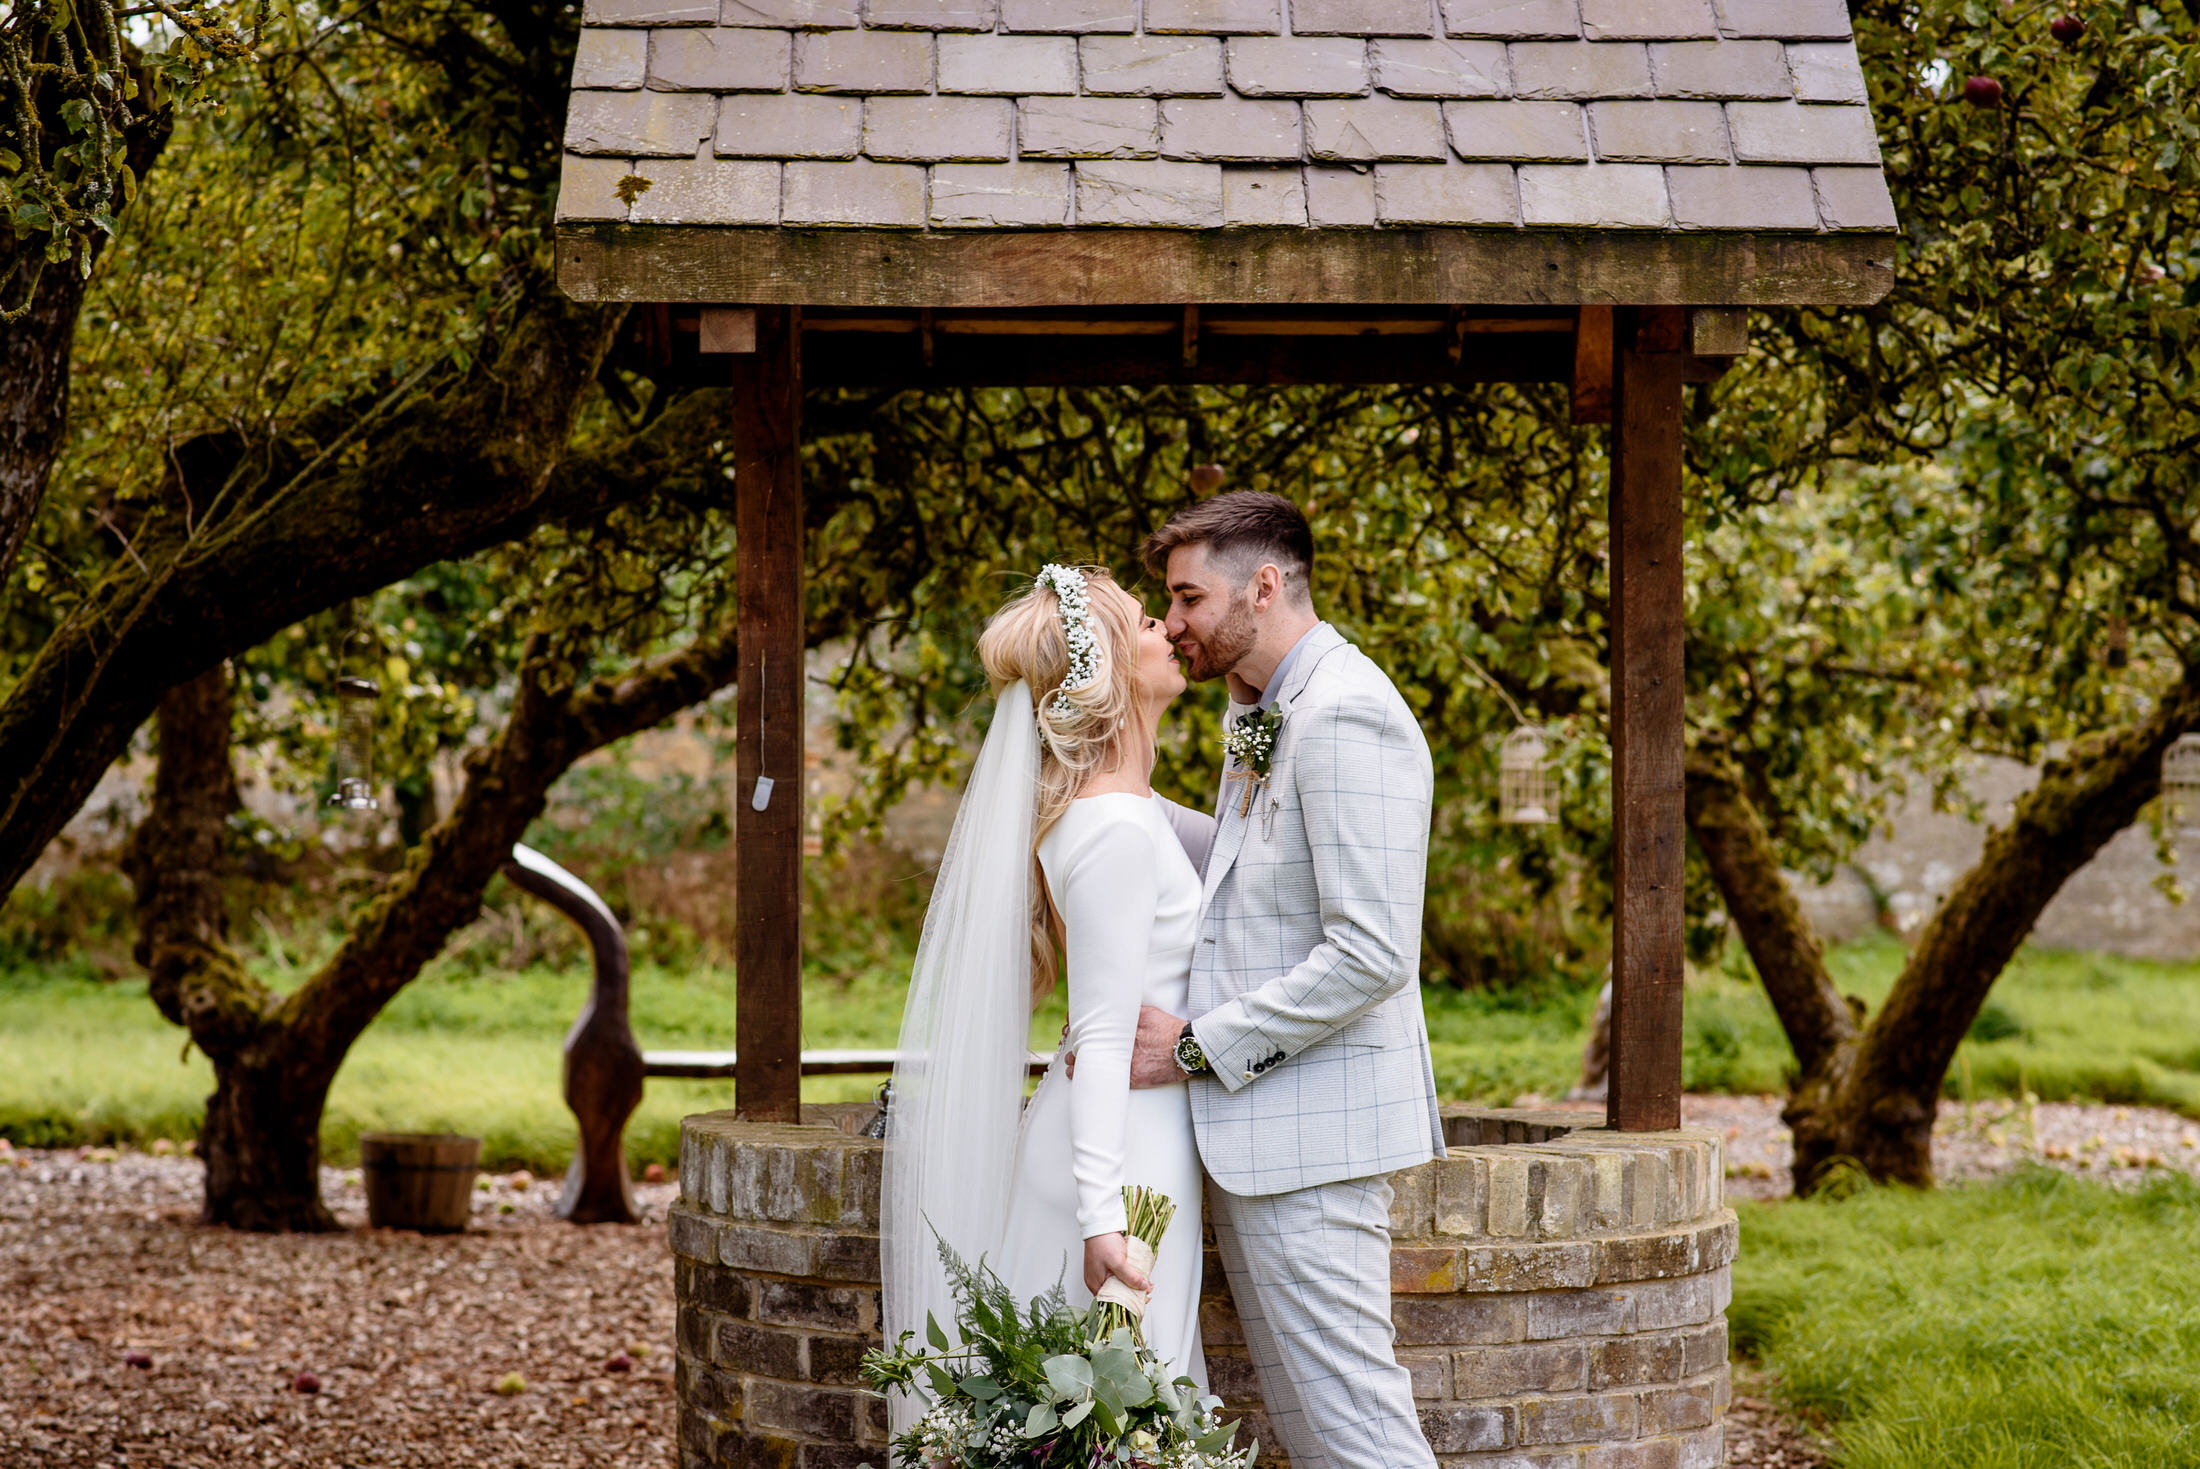 A wedding couple kiss in front of a gazebo at the Scrivelsby Walled Garden.